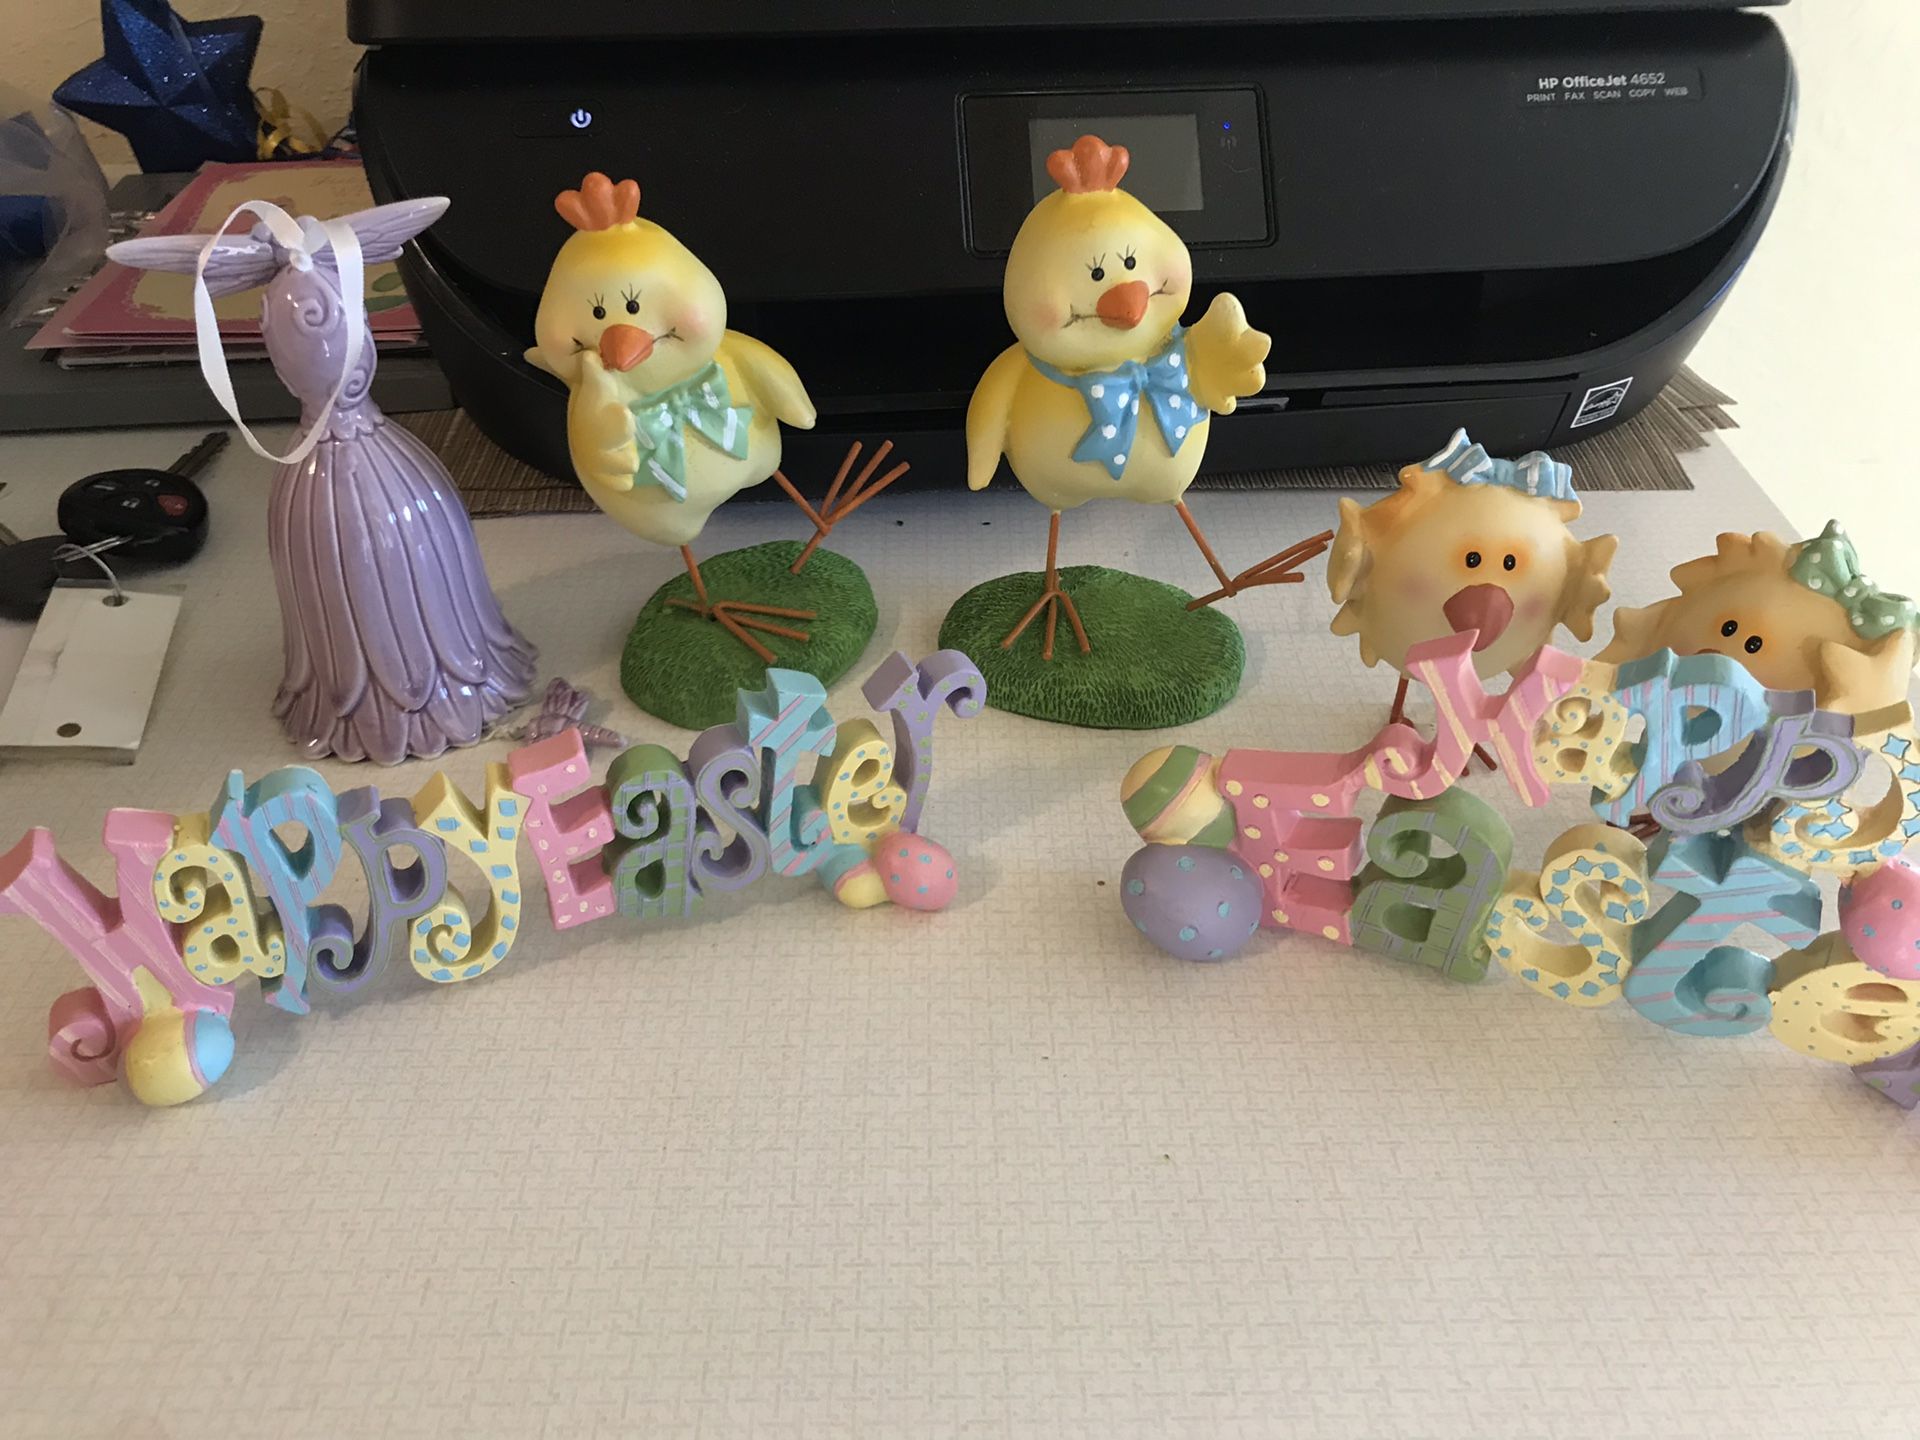 Easter and Christmas decorations